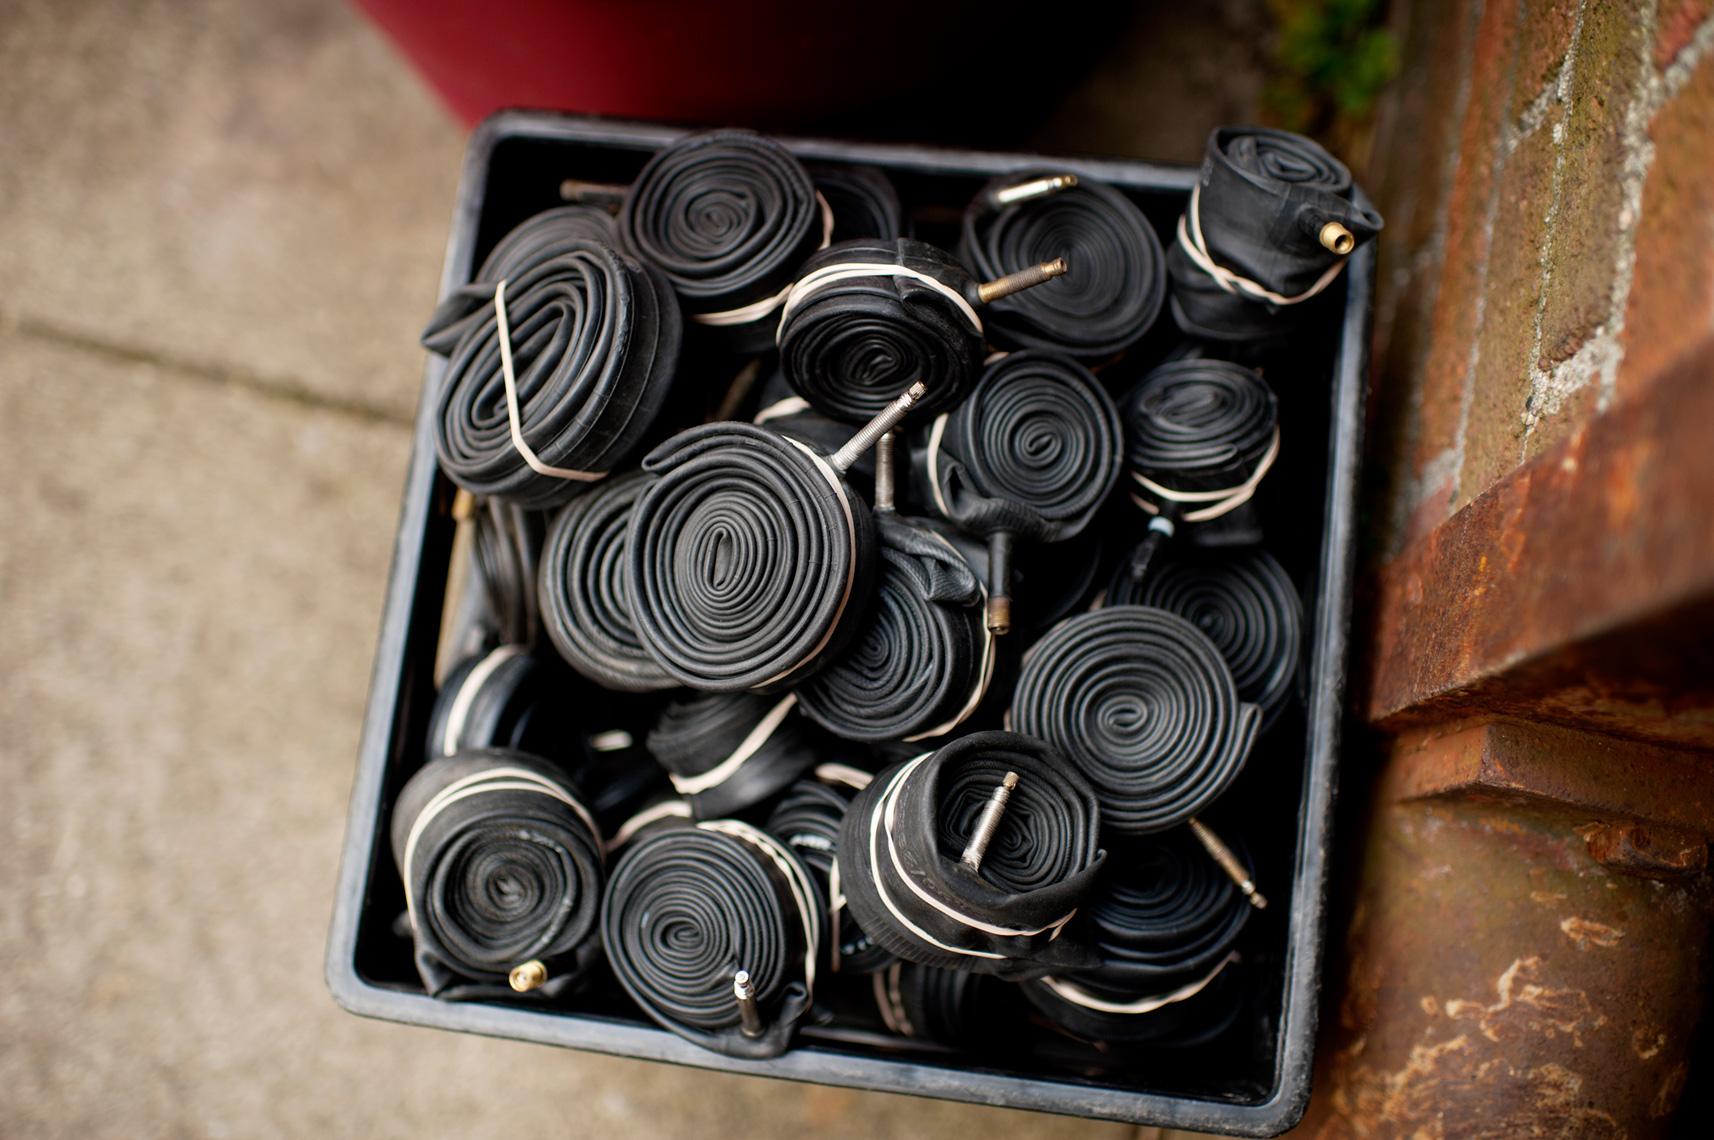 used donated inner tubes for use in pedal powered machines in third world countries